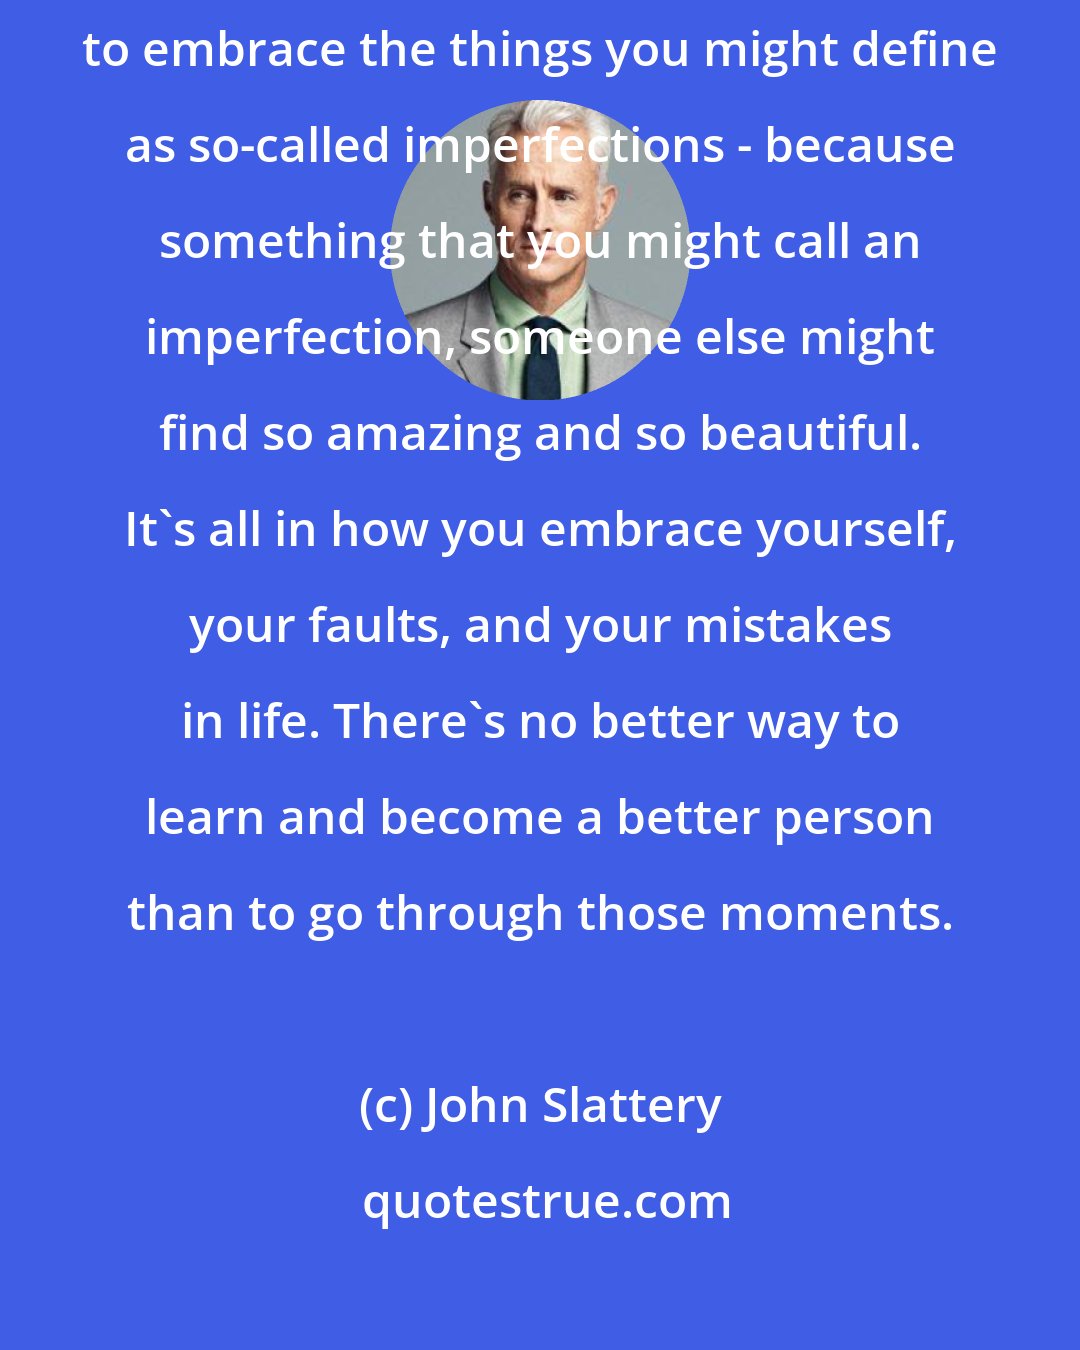 John Slattery: If [being confident stems from] a self-esteem issue, it's important to embrace the things you might define as so-called imperfections - because something that you might call an imperfection, someone else might find so amazing and so beautiful. It's all in how you embrace yourself, your faults, and your mistakes in life. There's no better way to learn and become a better person than to go through those moments.